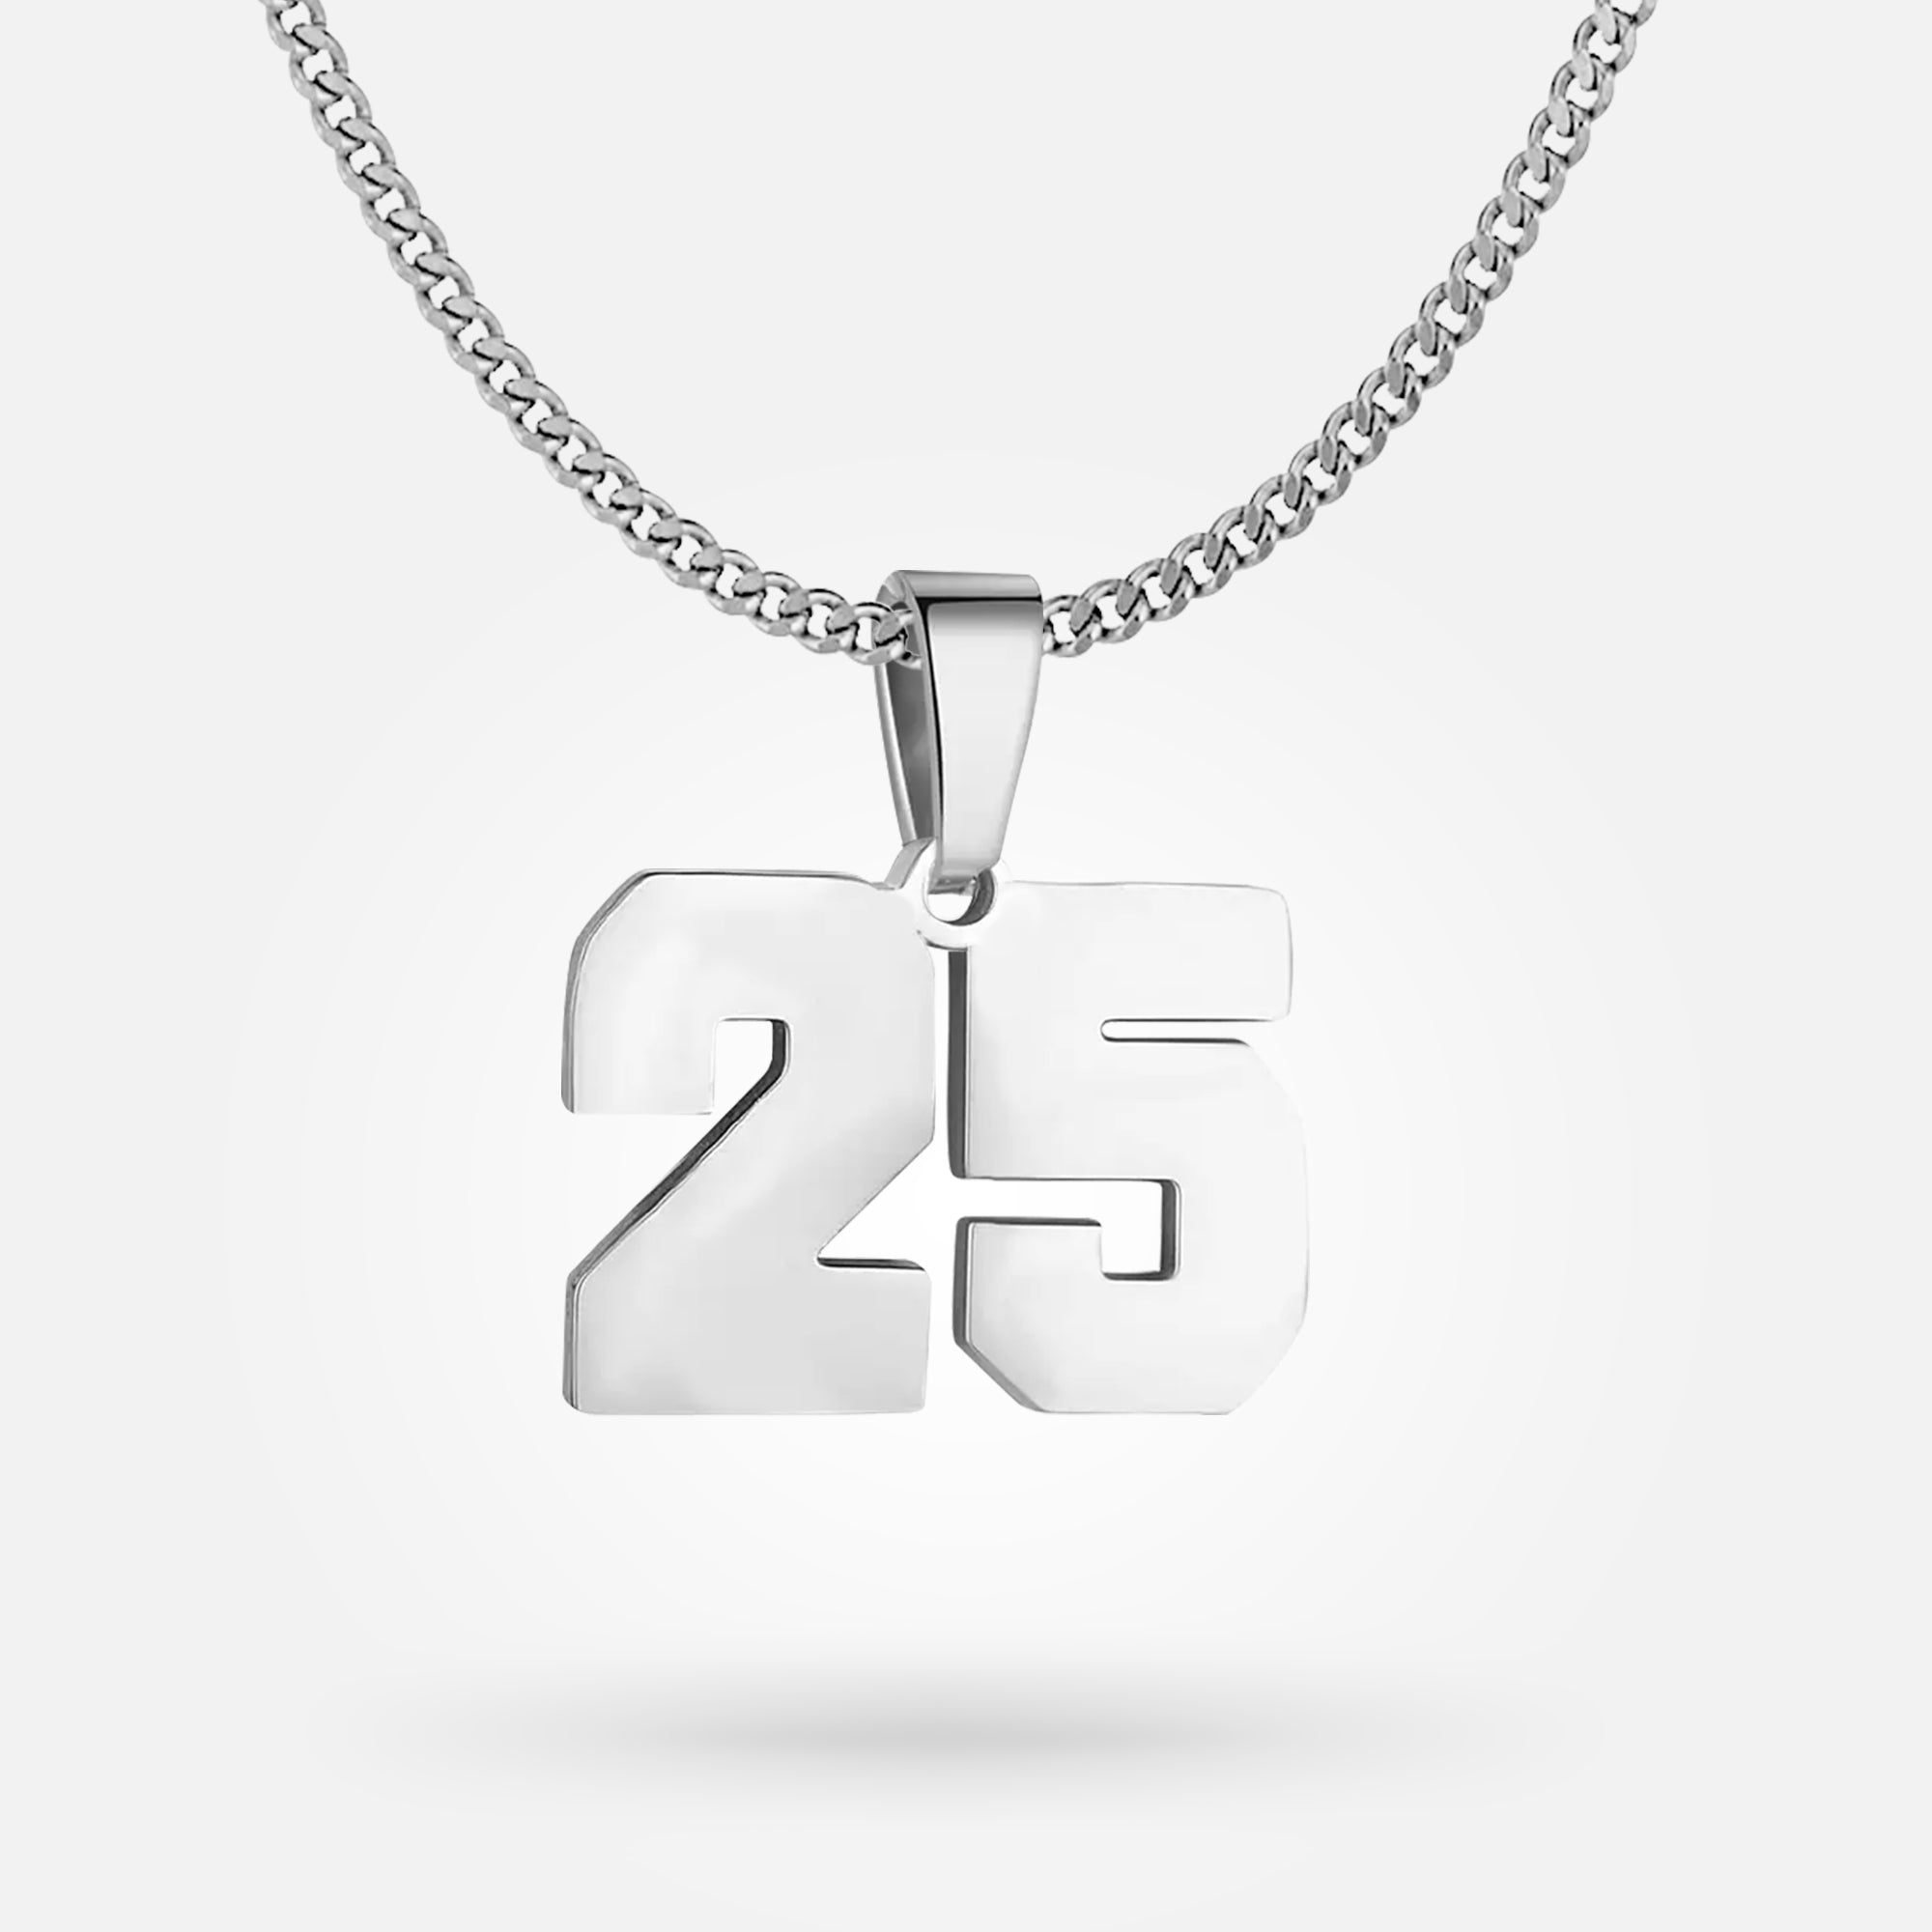 Personalized Boy Athlete Number Necklace - Stainless Steel Chain - 00-99  Pendant | eBay